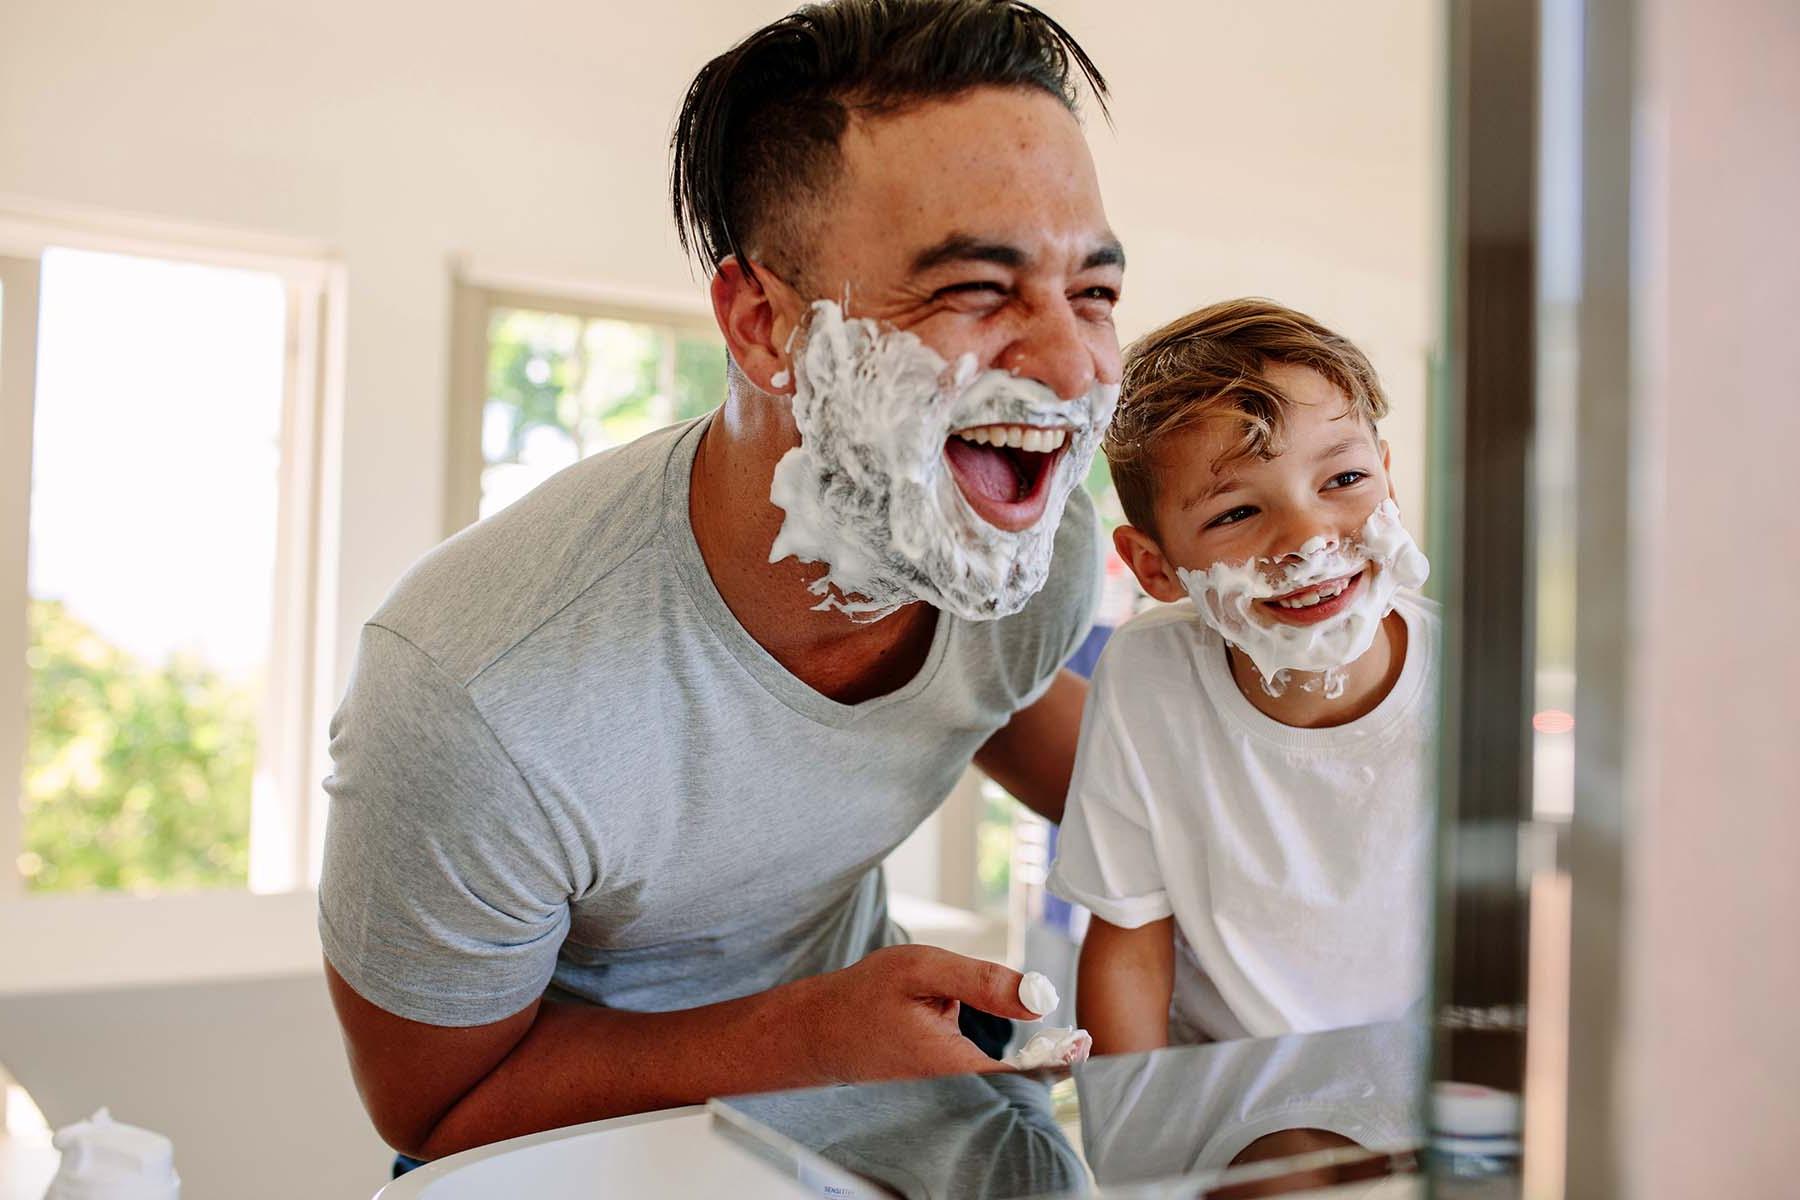 Man and boy with shaving cream on their faces laughing in bathroom.